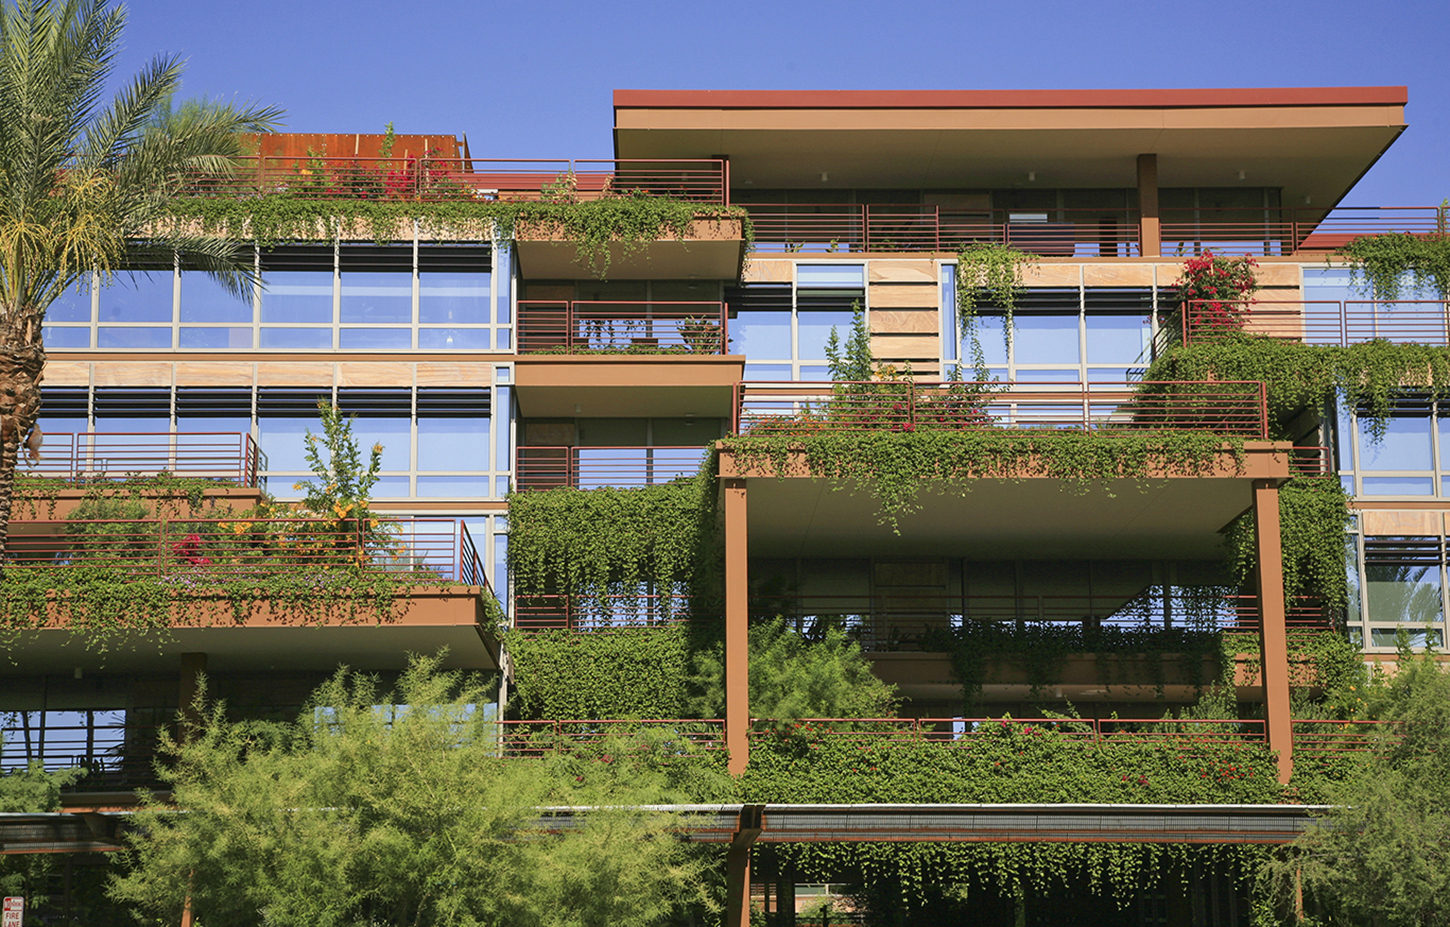  LEED Gold:  Verdant and Sustainable